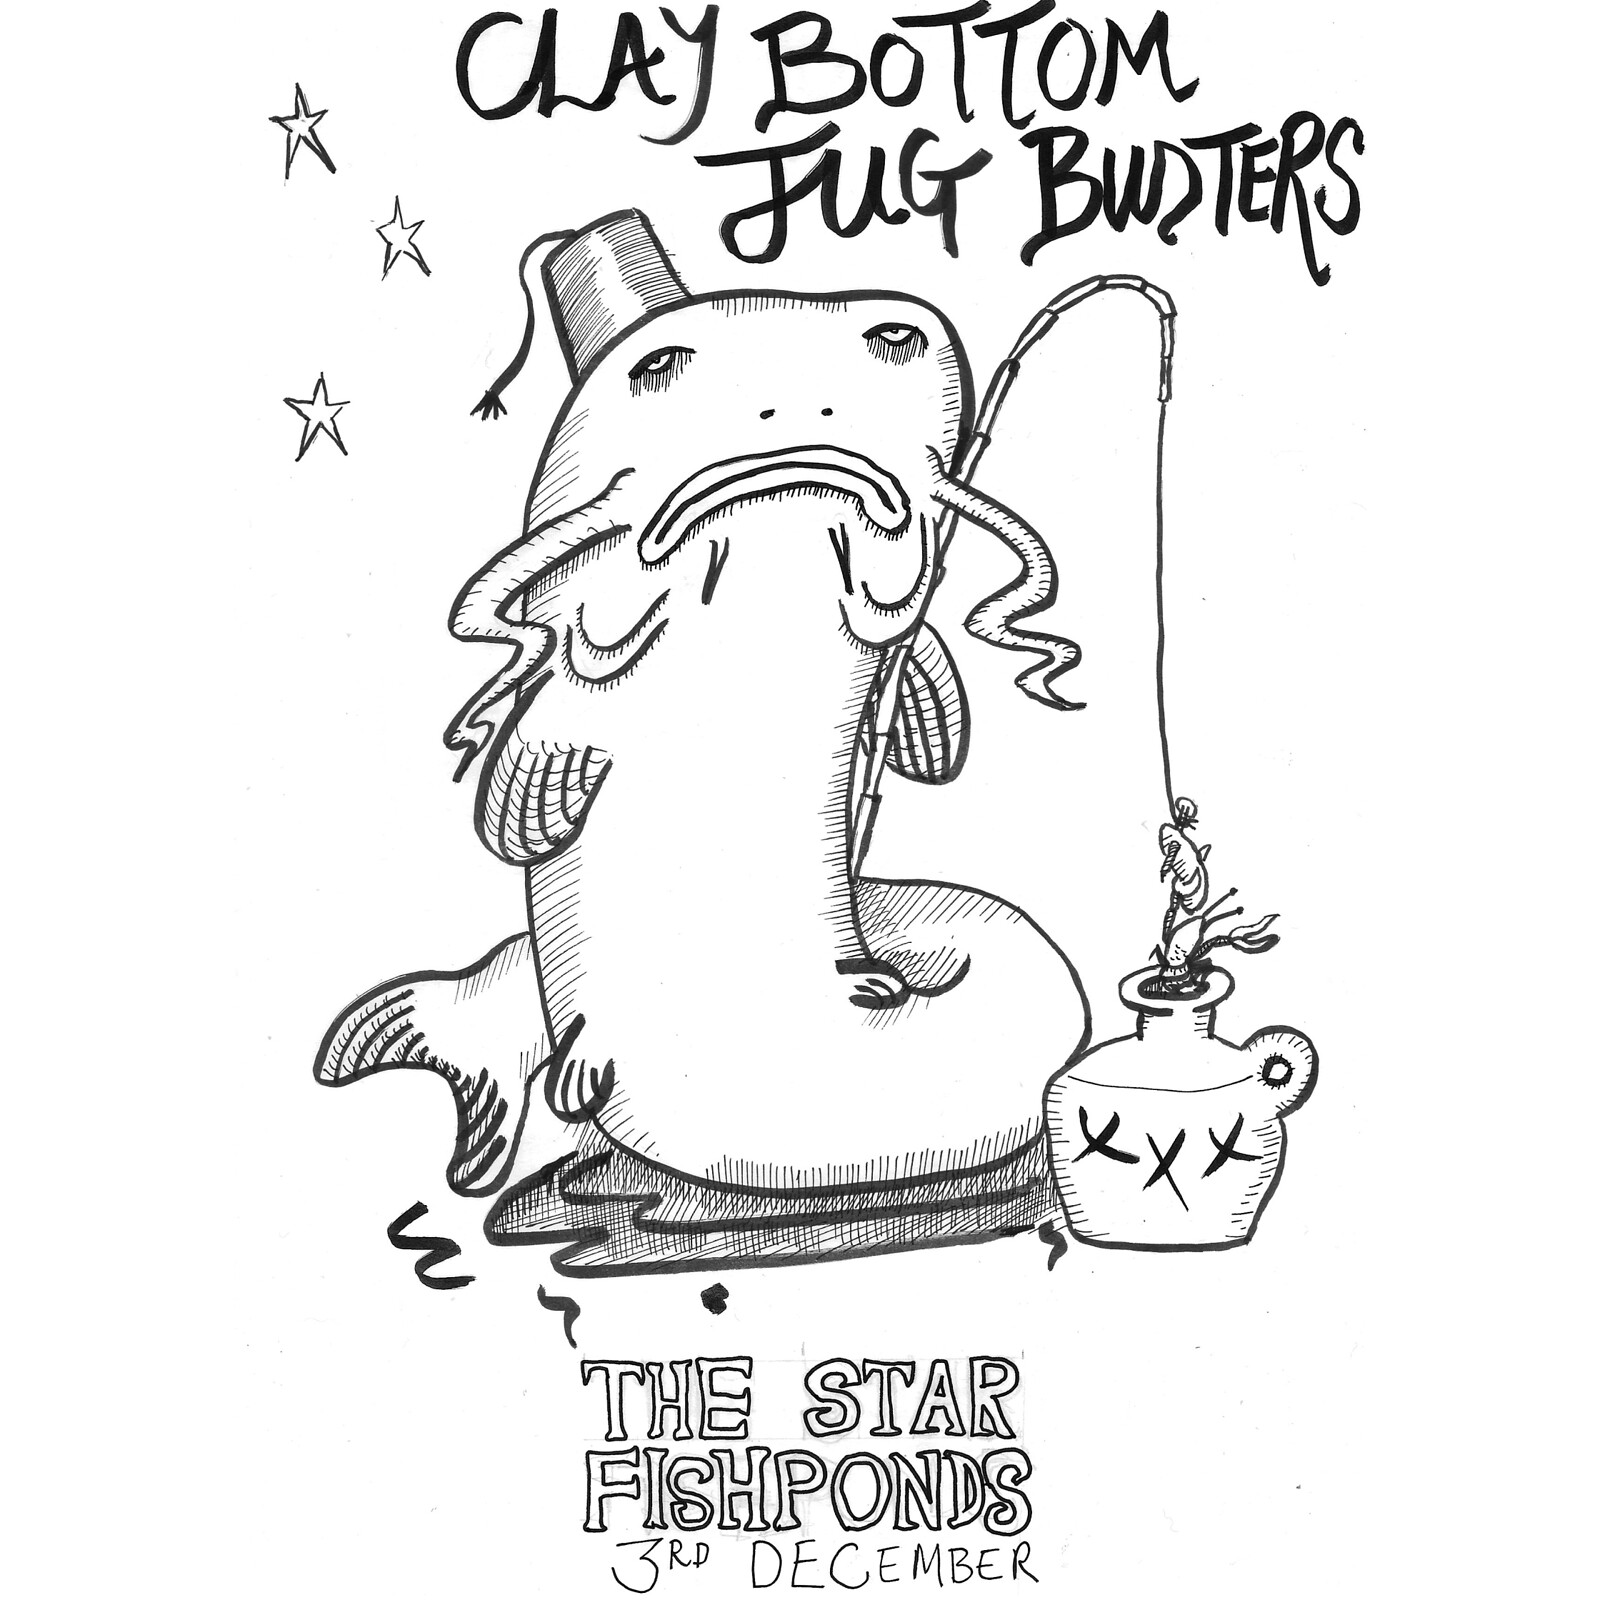 Clay Bottom Jug Busters at The Star, Fishponds